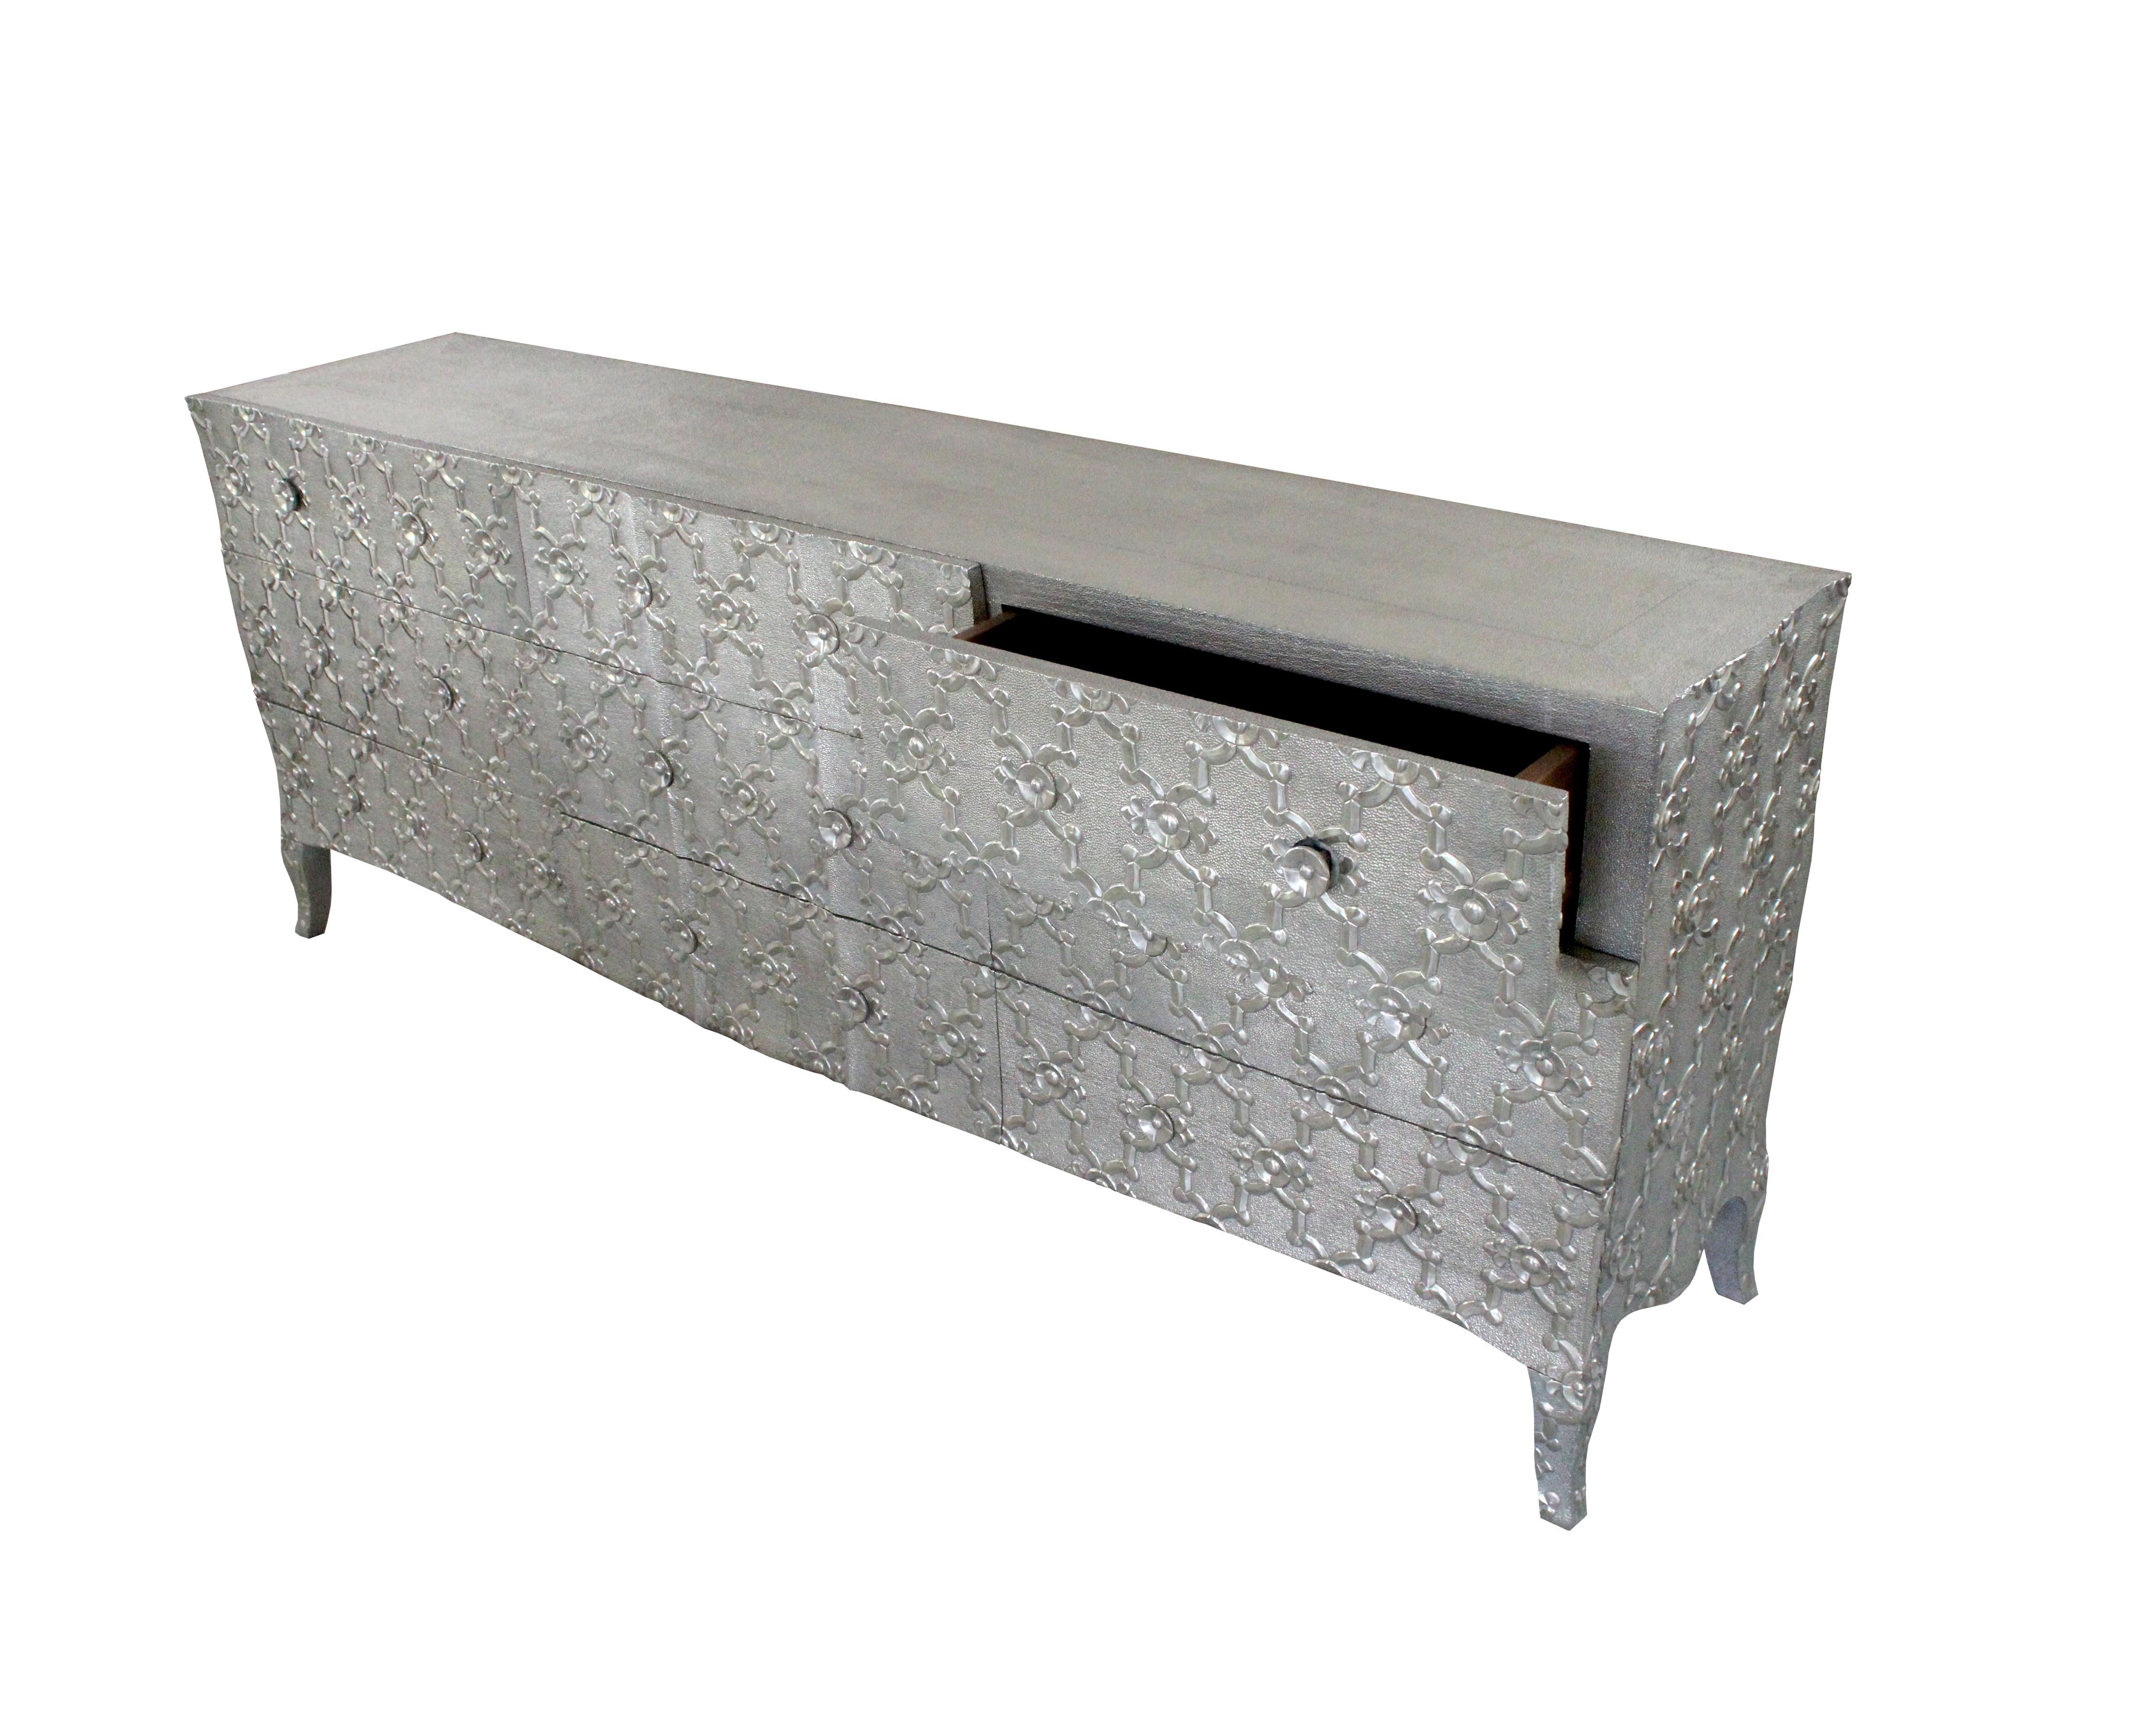 Louise 'Fleur-de-Lis' Dresser by Paul Mathieu for Stephanie Odegard In New Condition For Sale In New York, NY